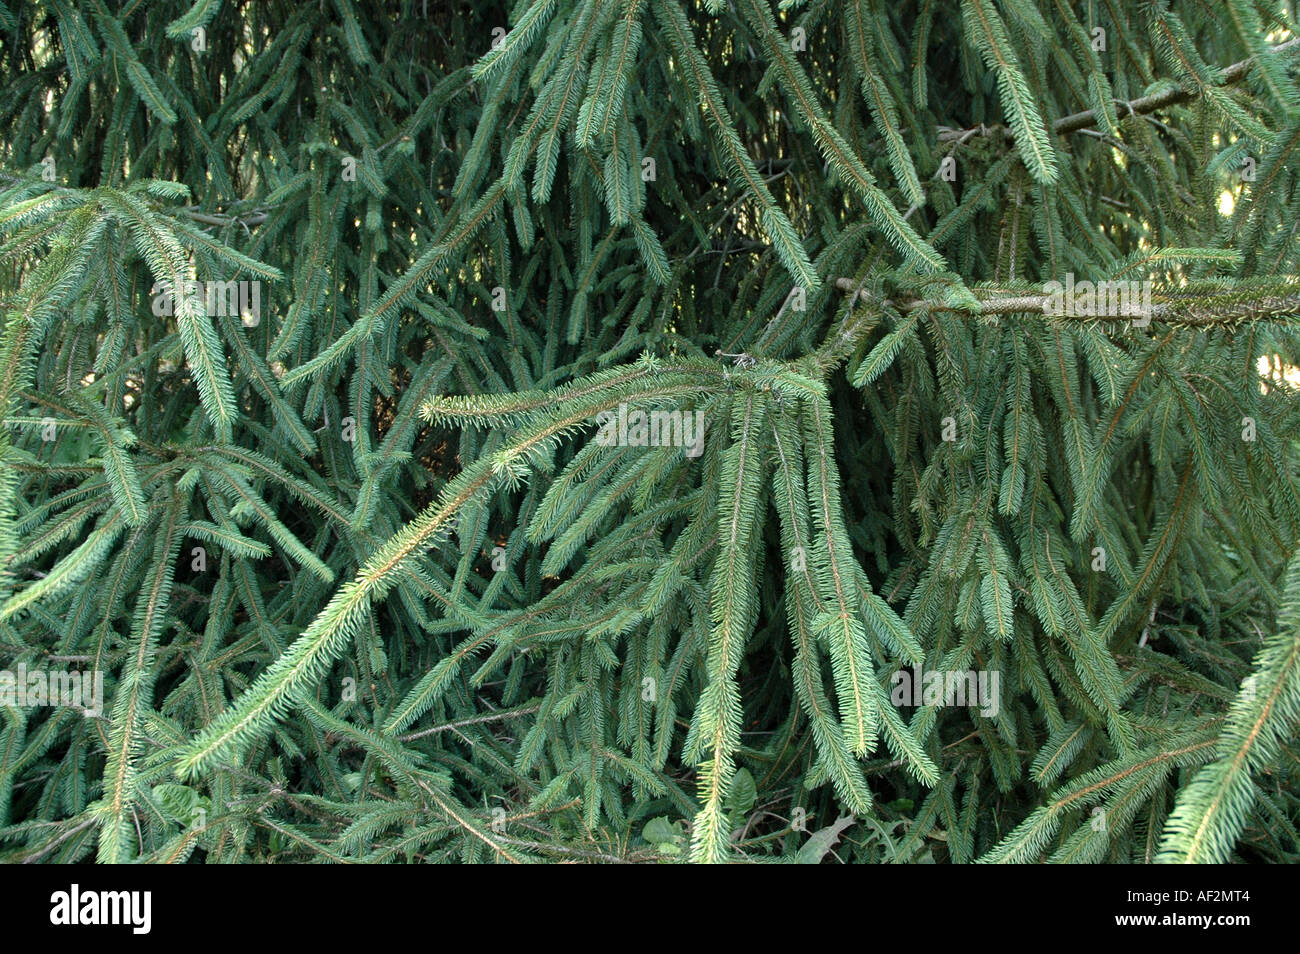 Rat's Tail Spruce Picea abies virgata also called Serpentine spruce or Snake Spruce Stock Photo